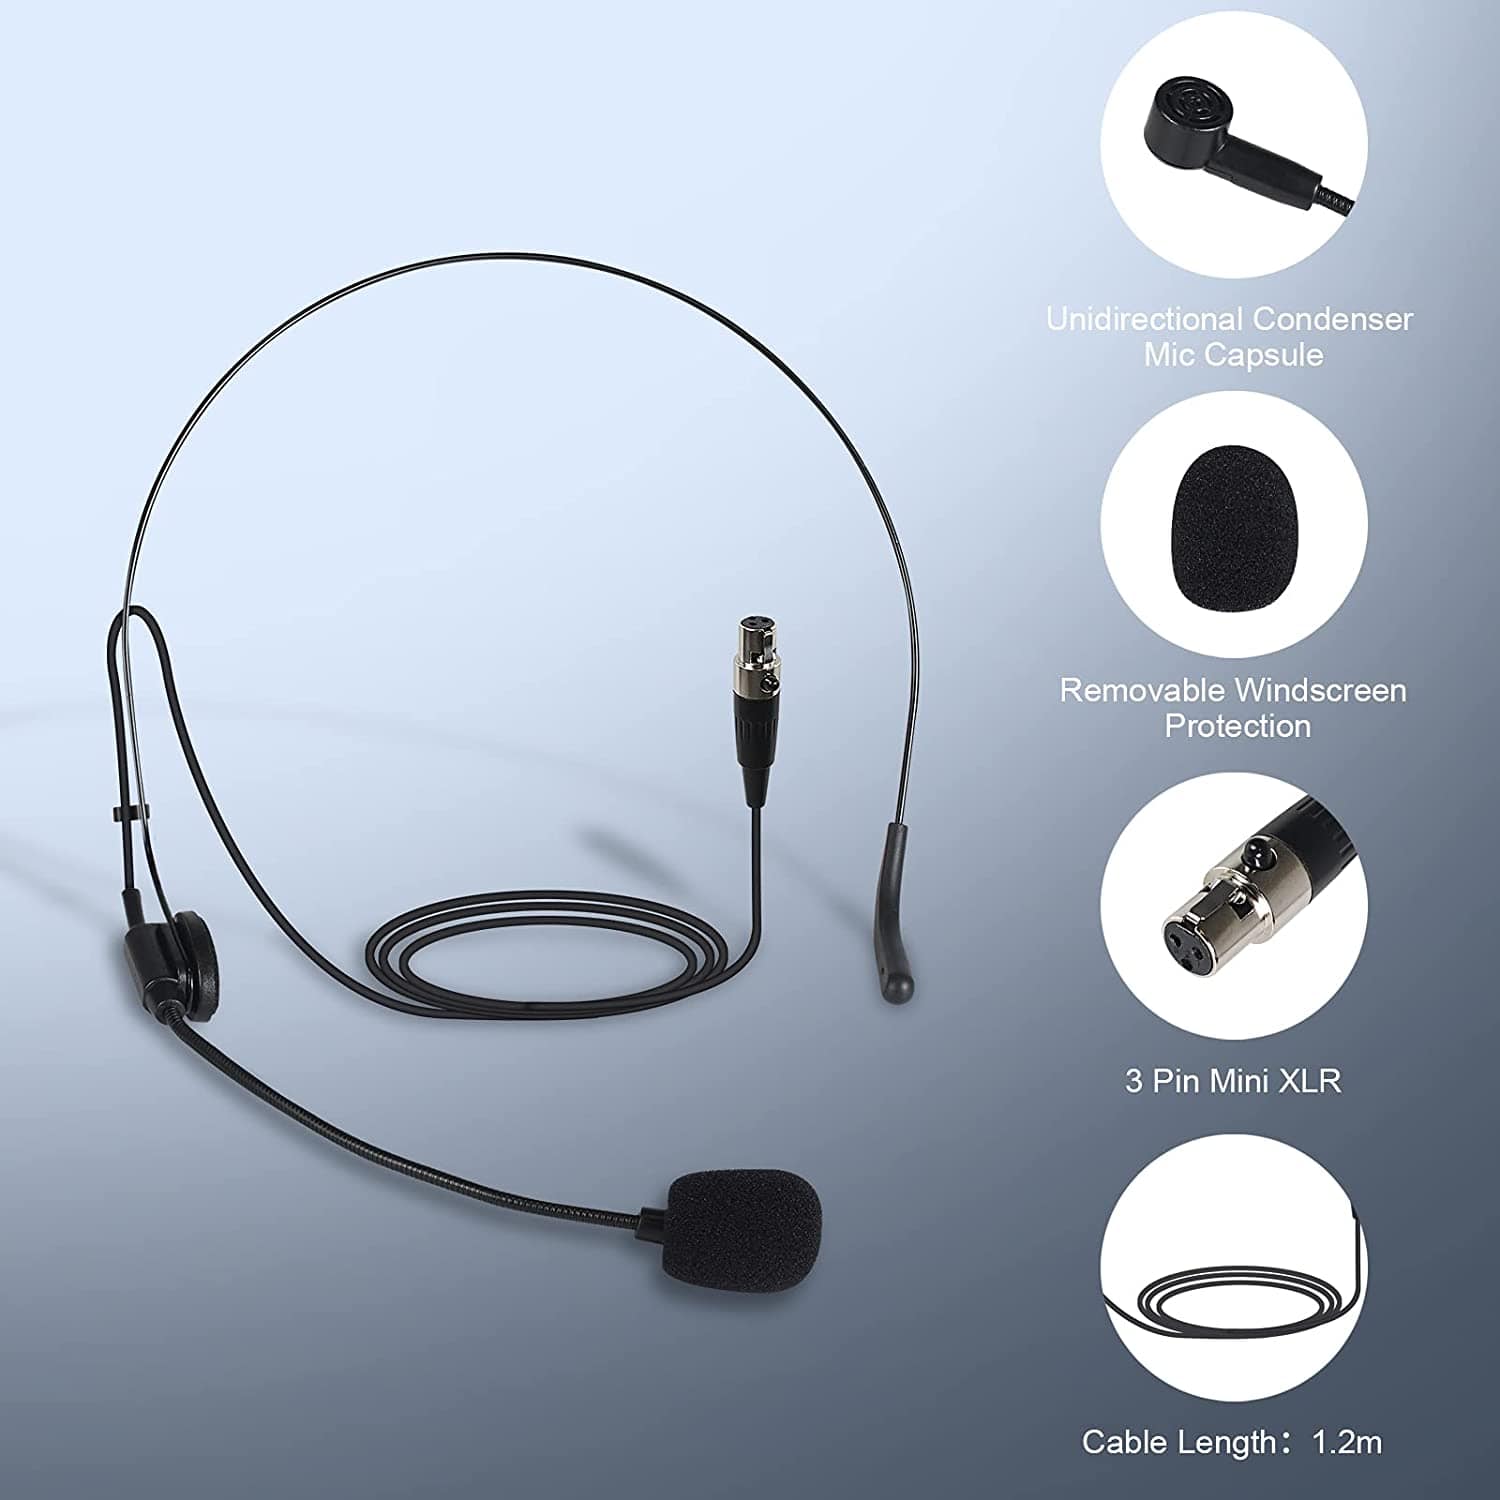 Phenyx Pro Black Headset Microphone Combo With 3 Pin Mini XLR Jack (Pack of 2)